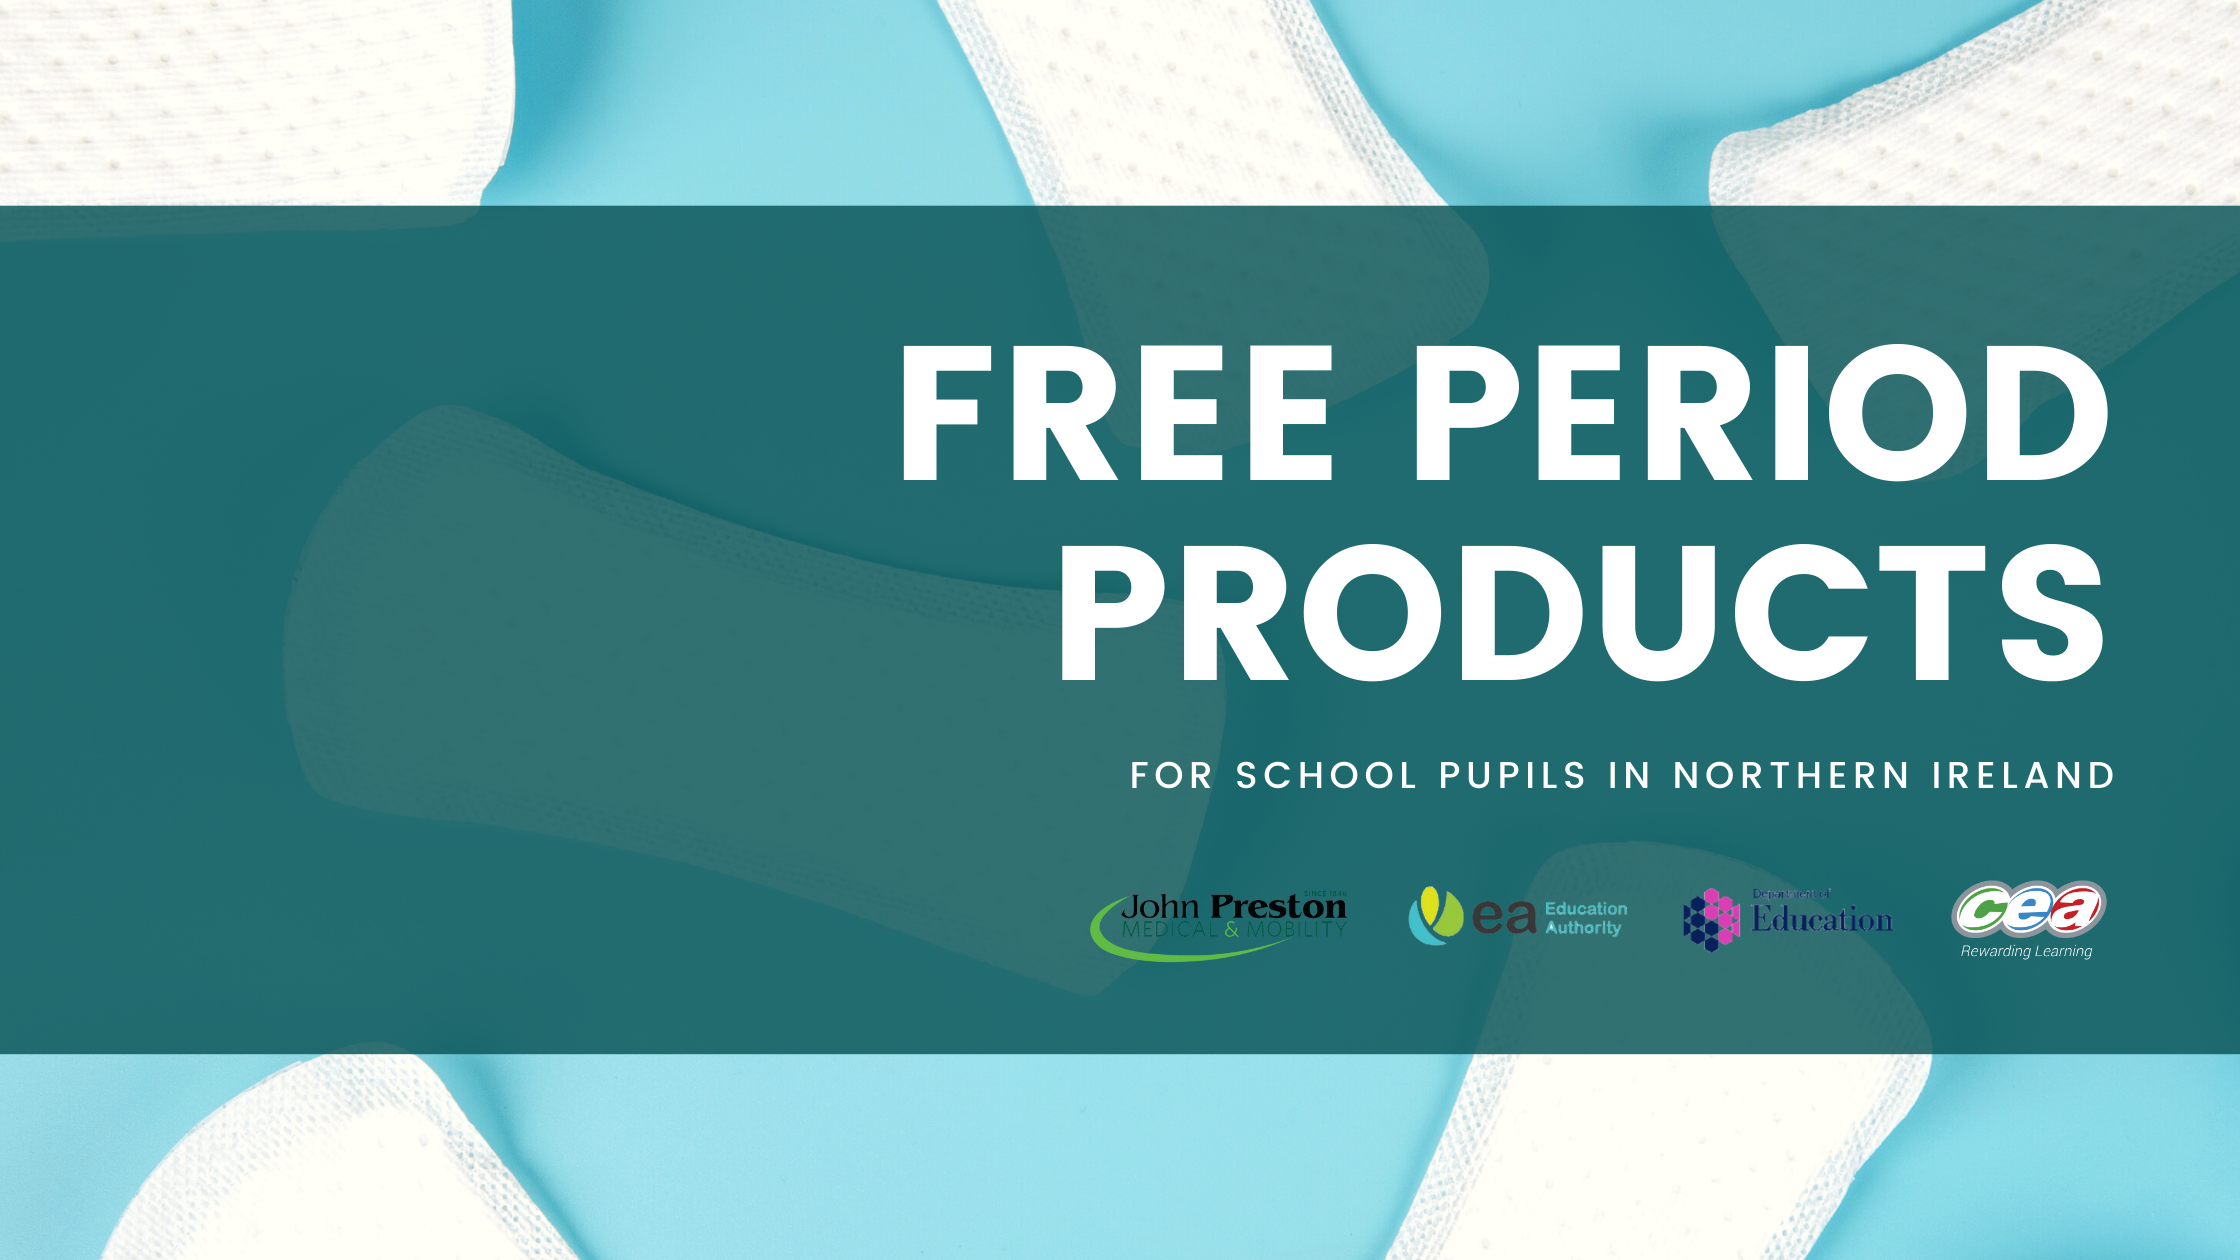 FREE period products for school pupils in Northern Ireland